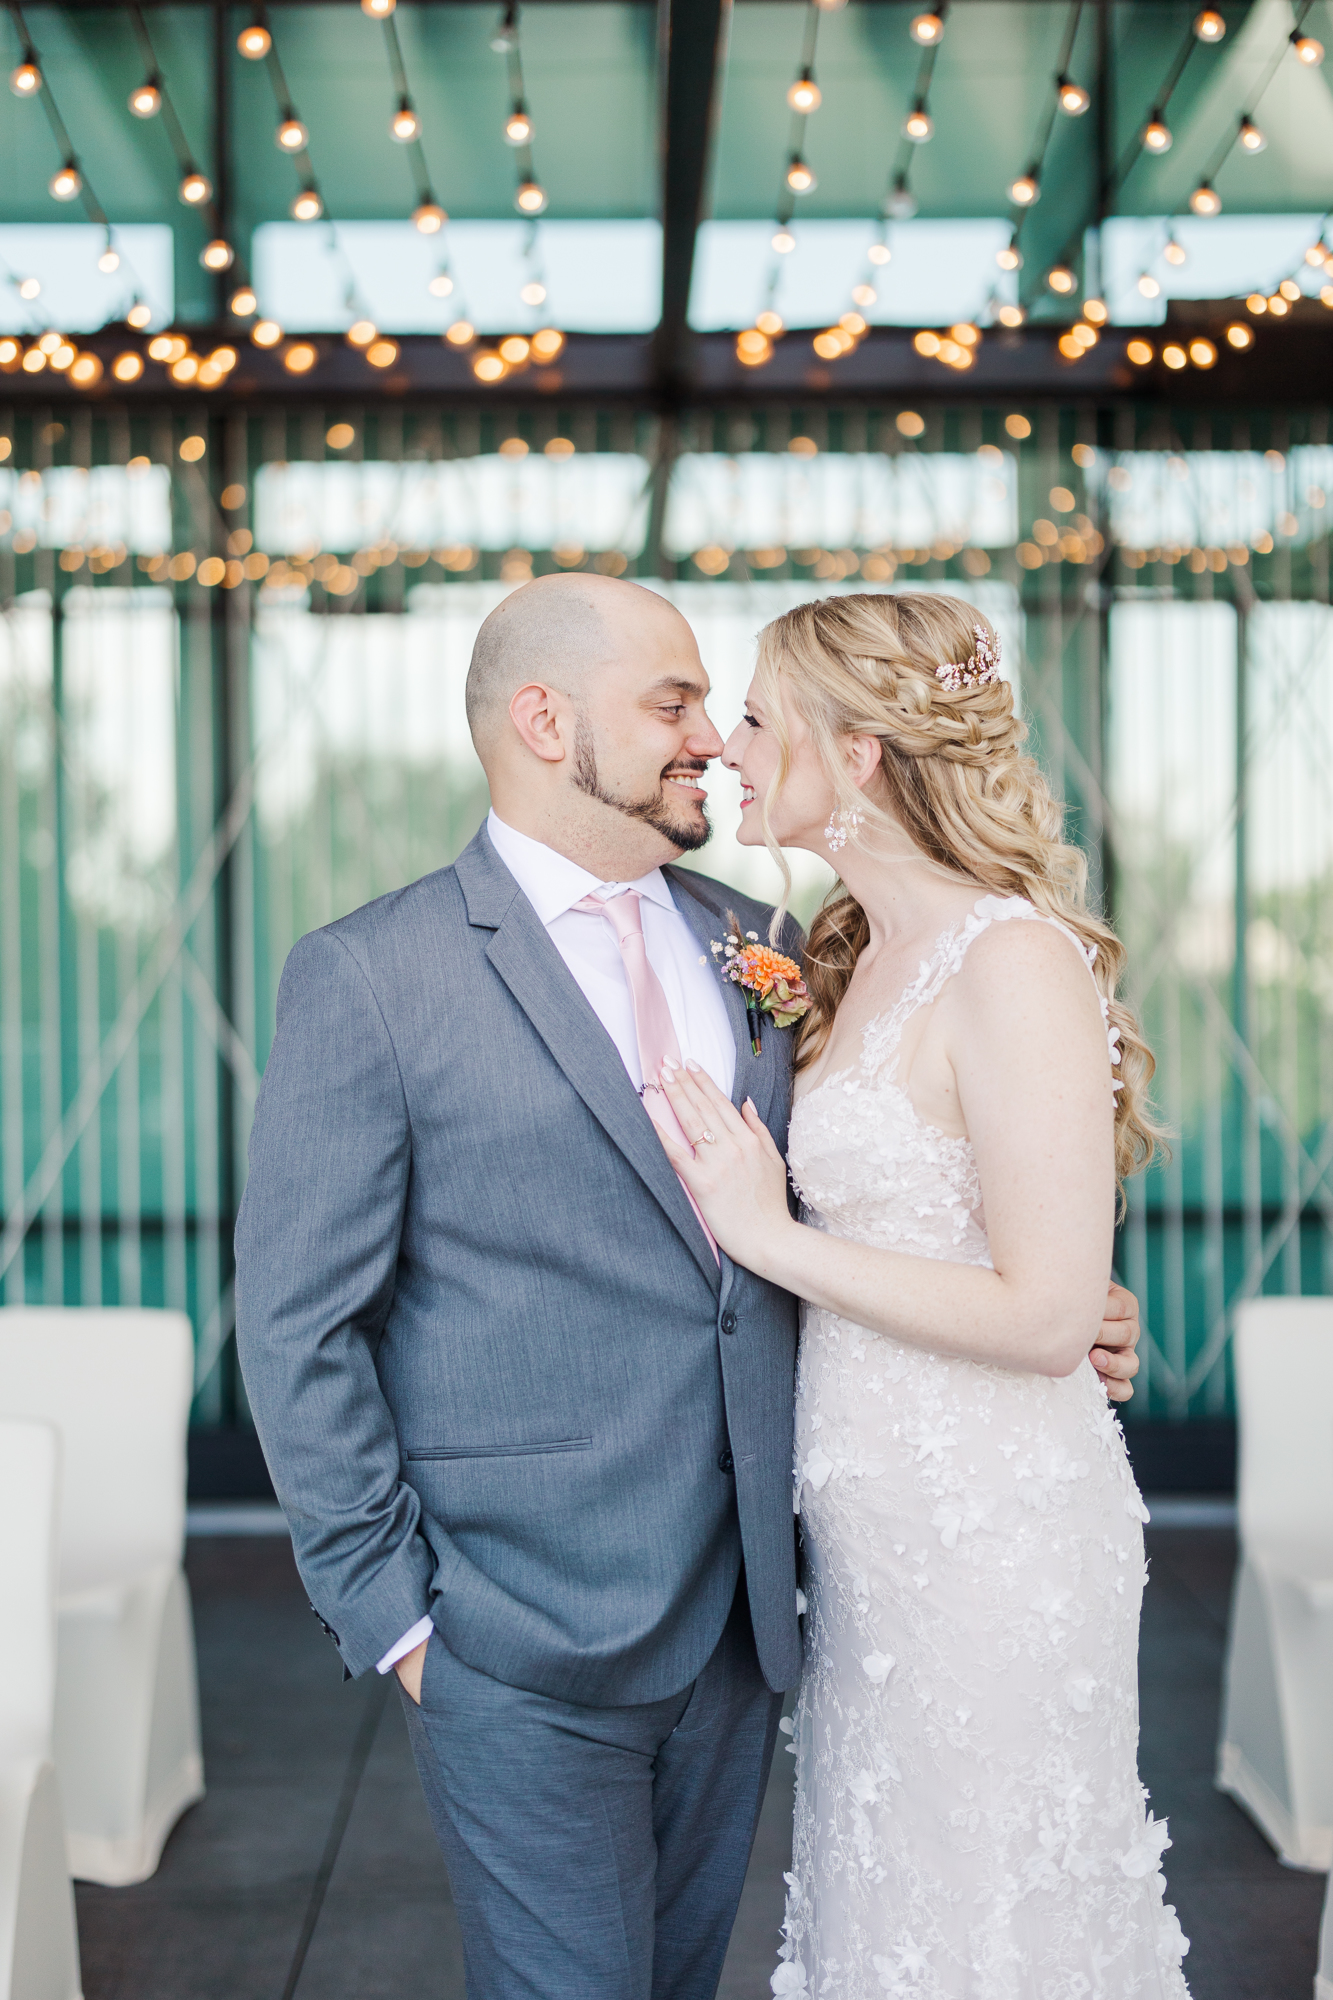 Perfect New Jersey Wedding at W Hoboken